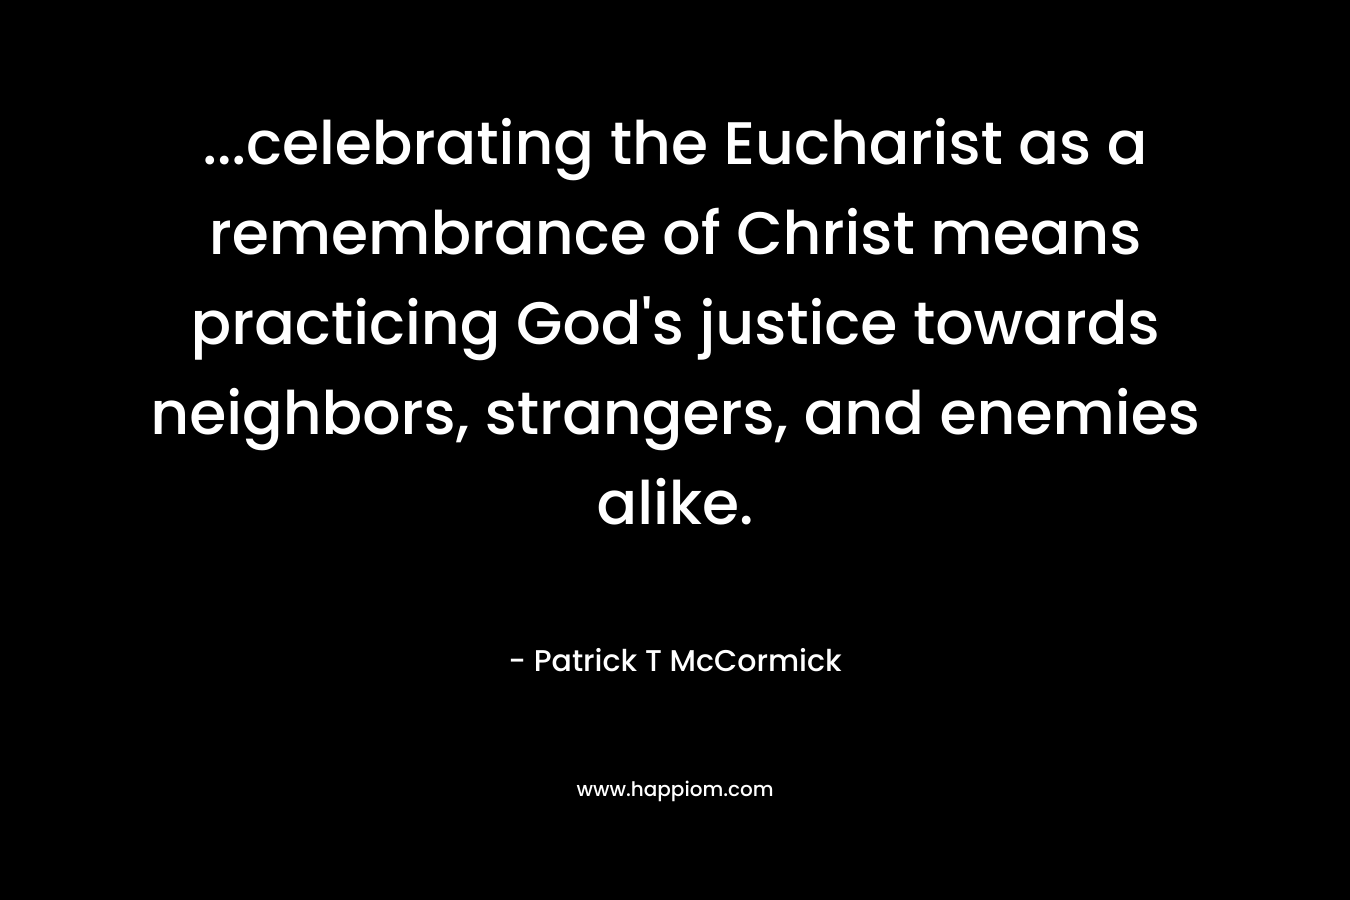 …celebrating the Eucharist as a remembrance of Christ means practicing God’s justice towards neighbors, strangers, and enemies alike. – Patrick T McCormick